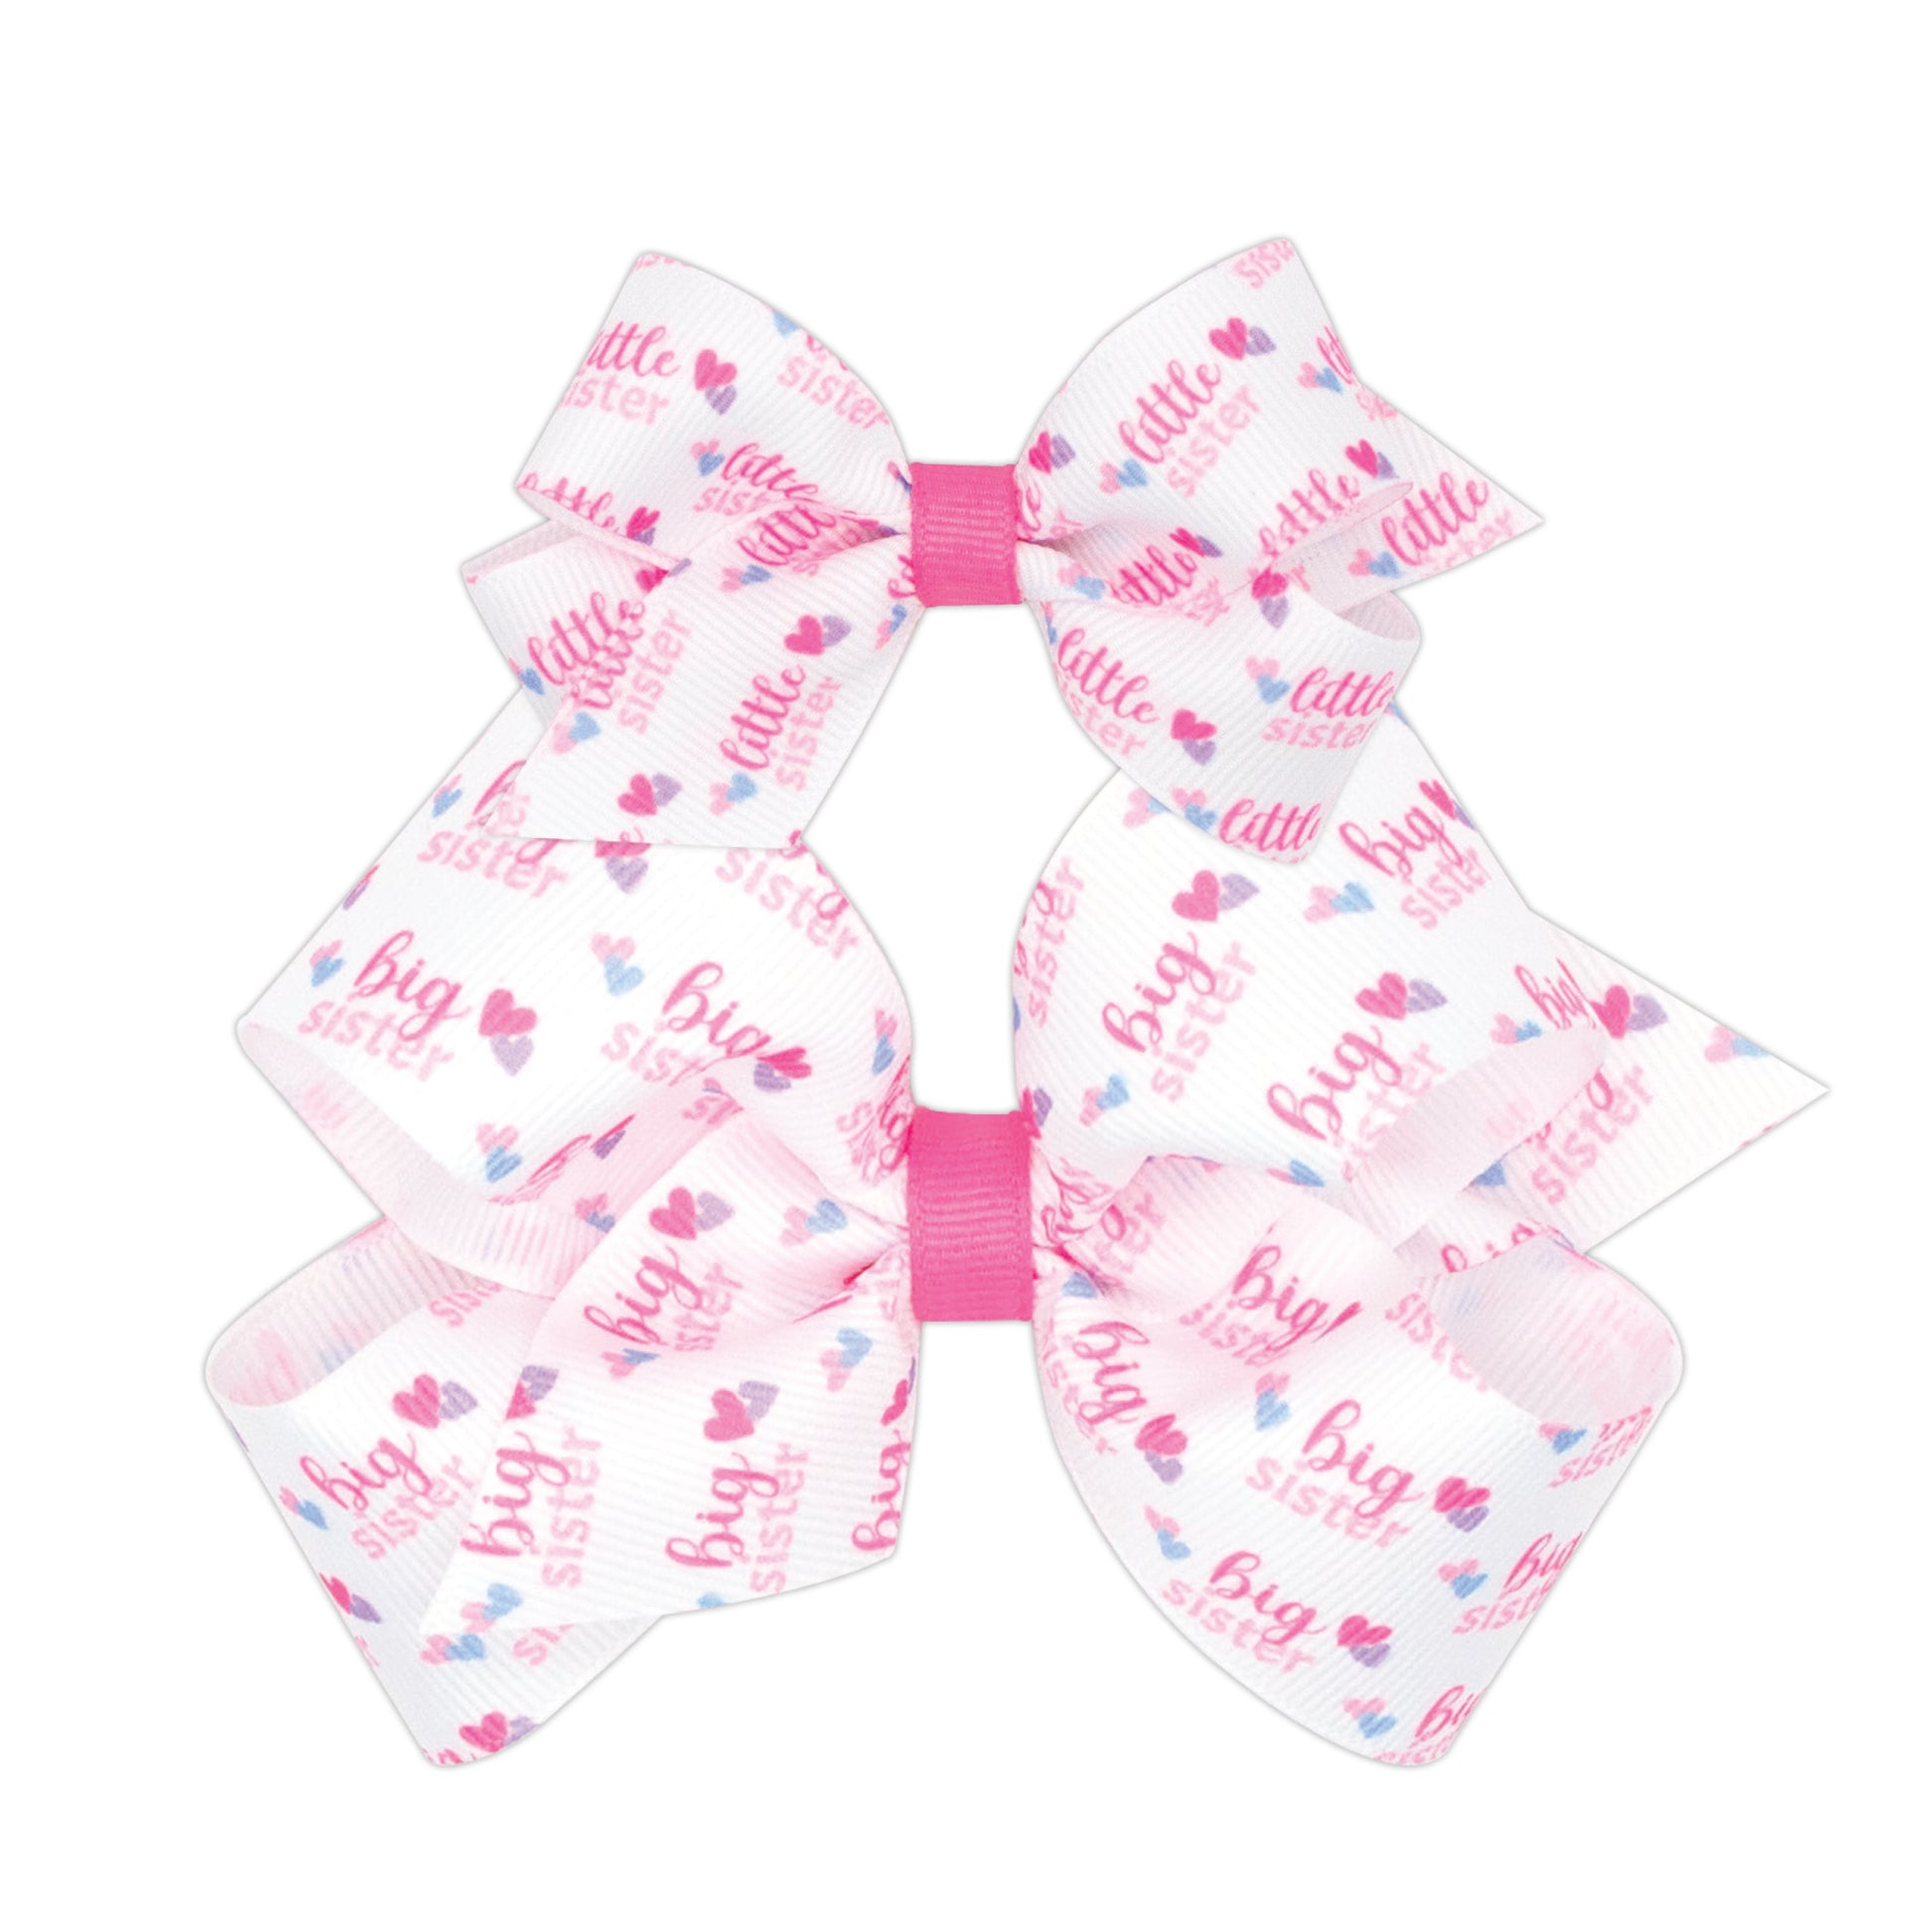 Lil/Big Sister with Hearts 2 Pack Bows Accessories Wee Ones   